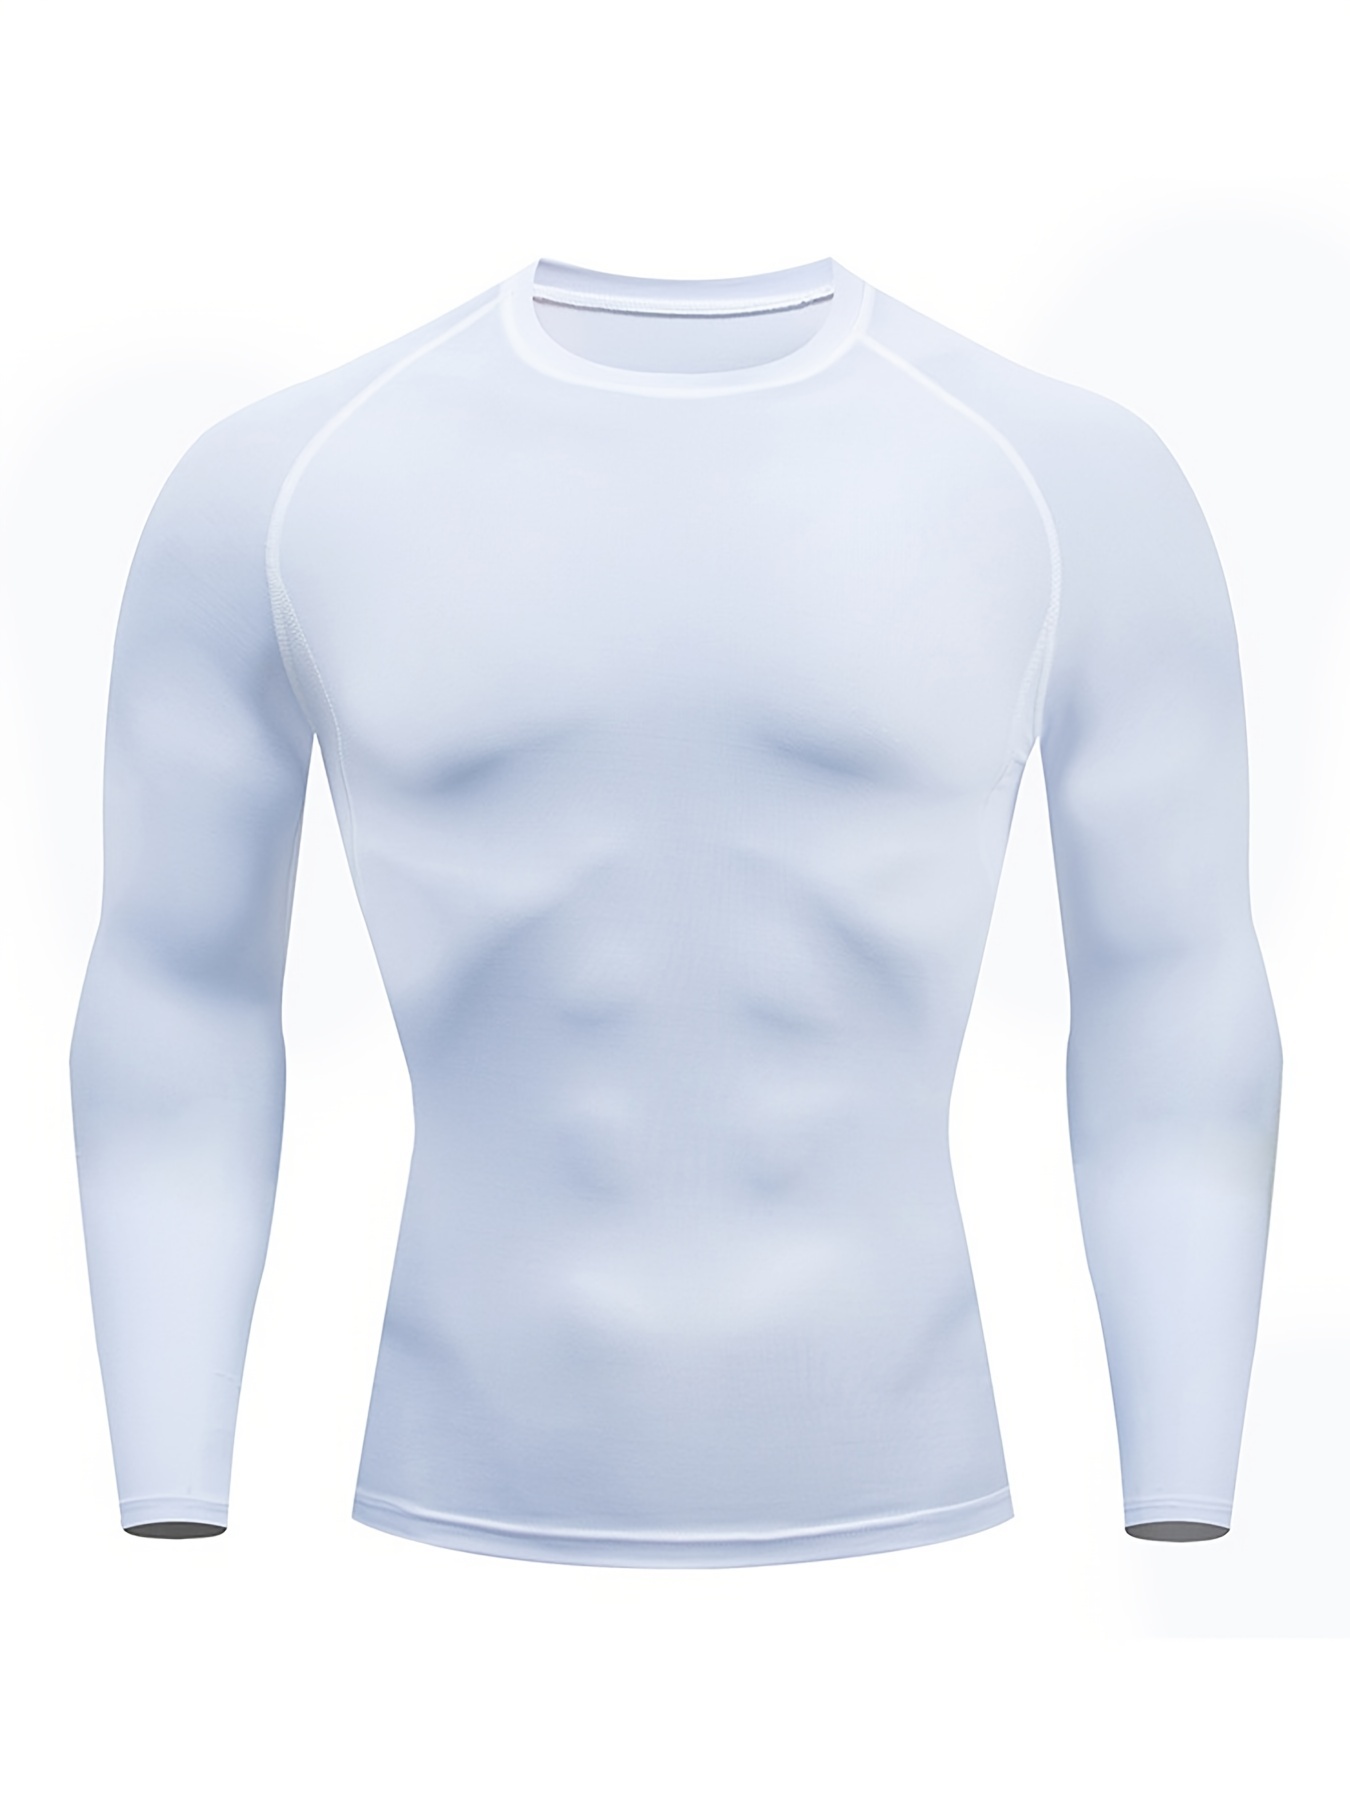 SKINS Men's A400 Compression Long Sleeve Top, Shirts -  Canada